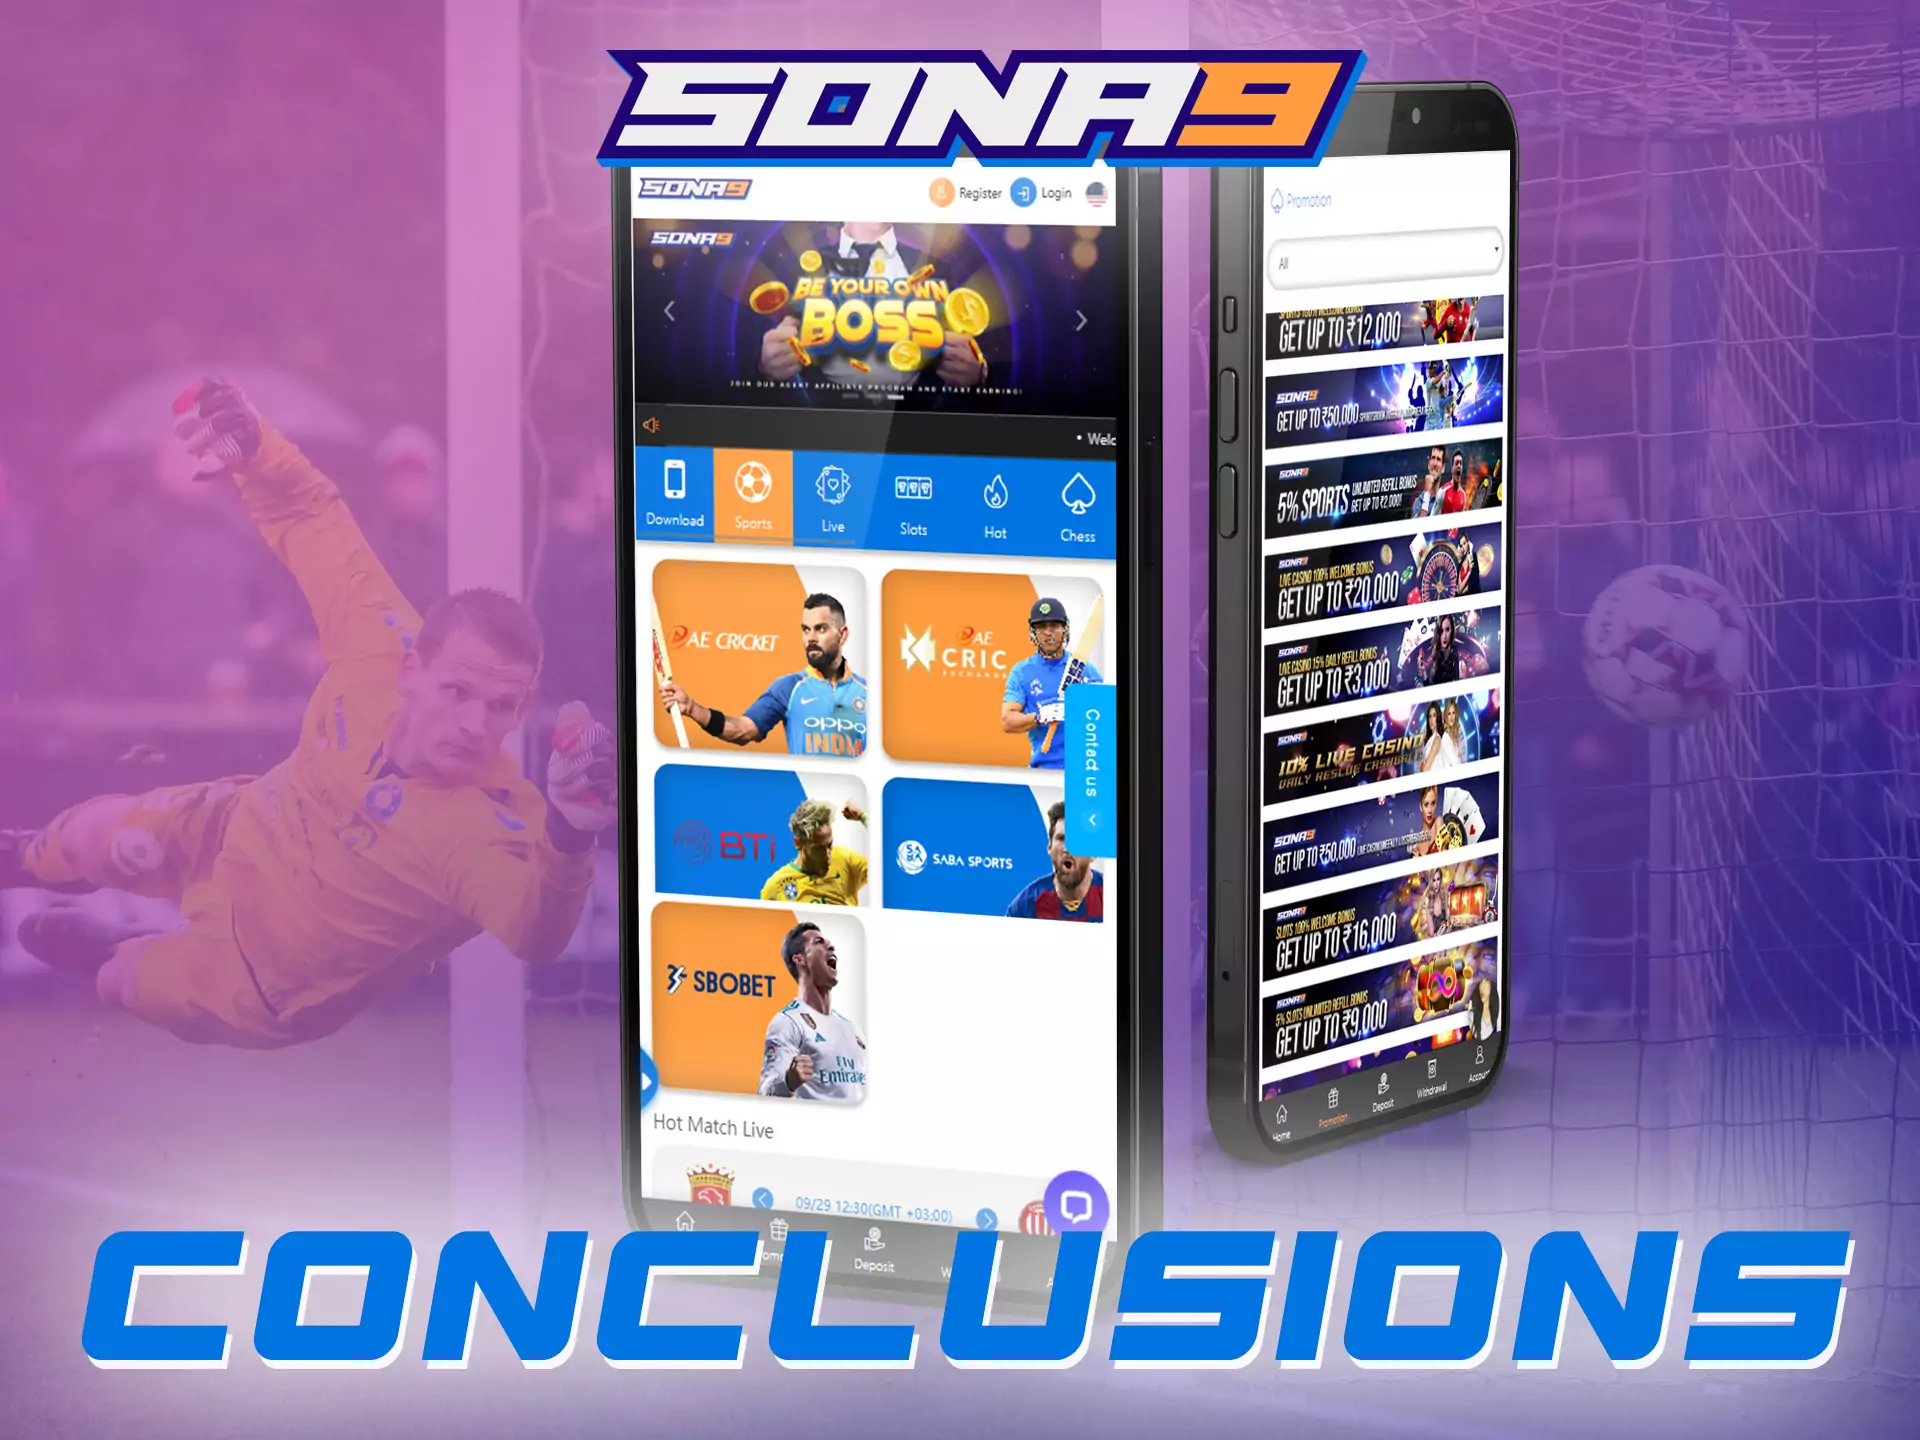 The Sona9 app is great for both betting on sports and playing casino games.